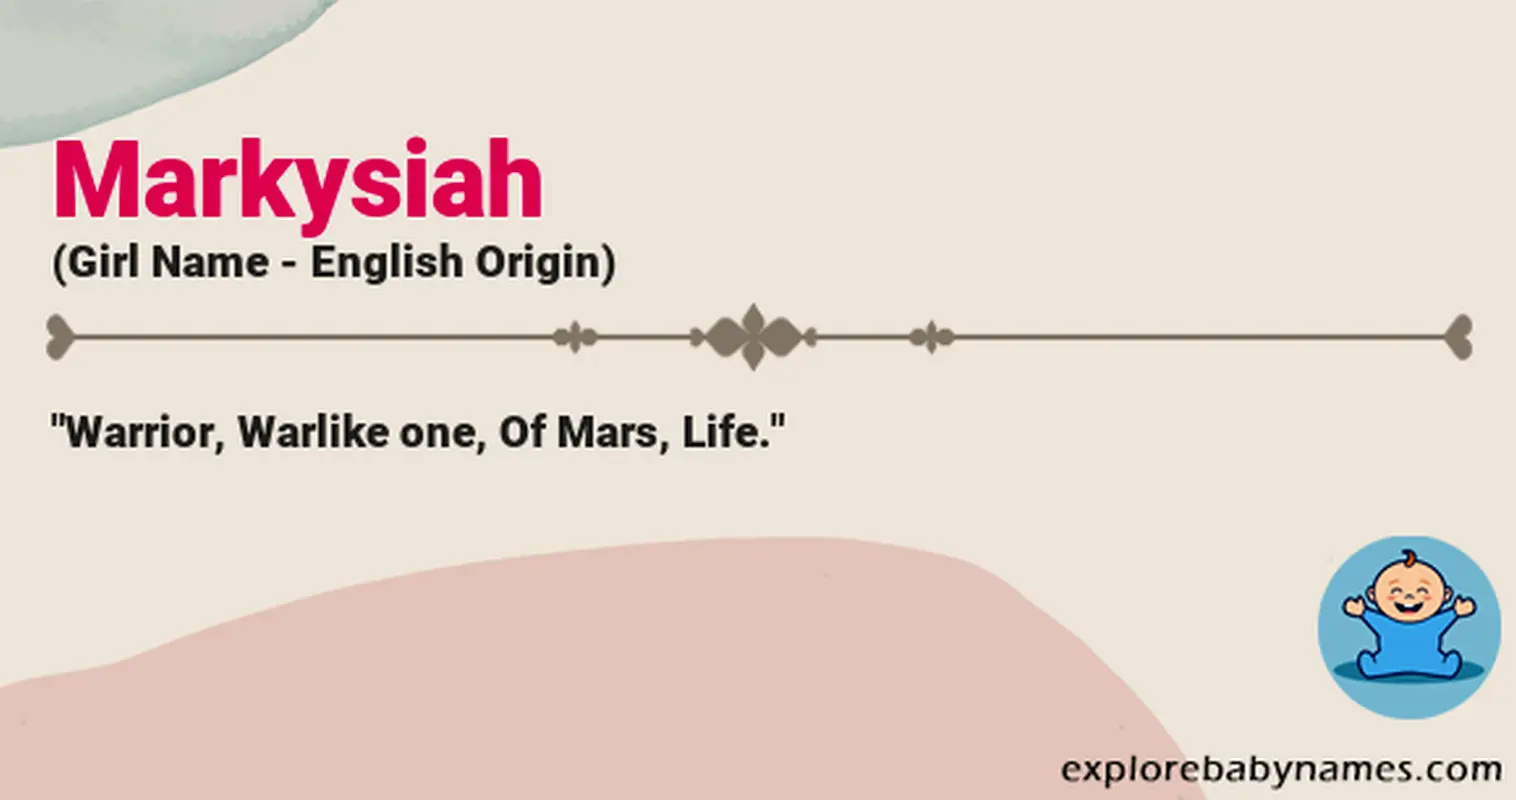 Meaning of Markysiah